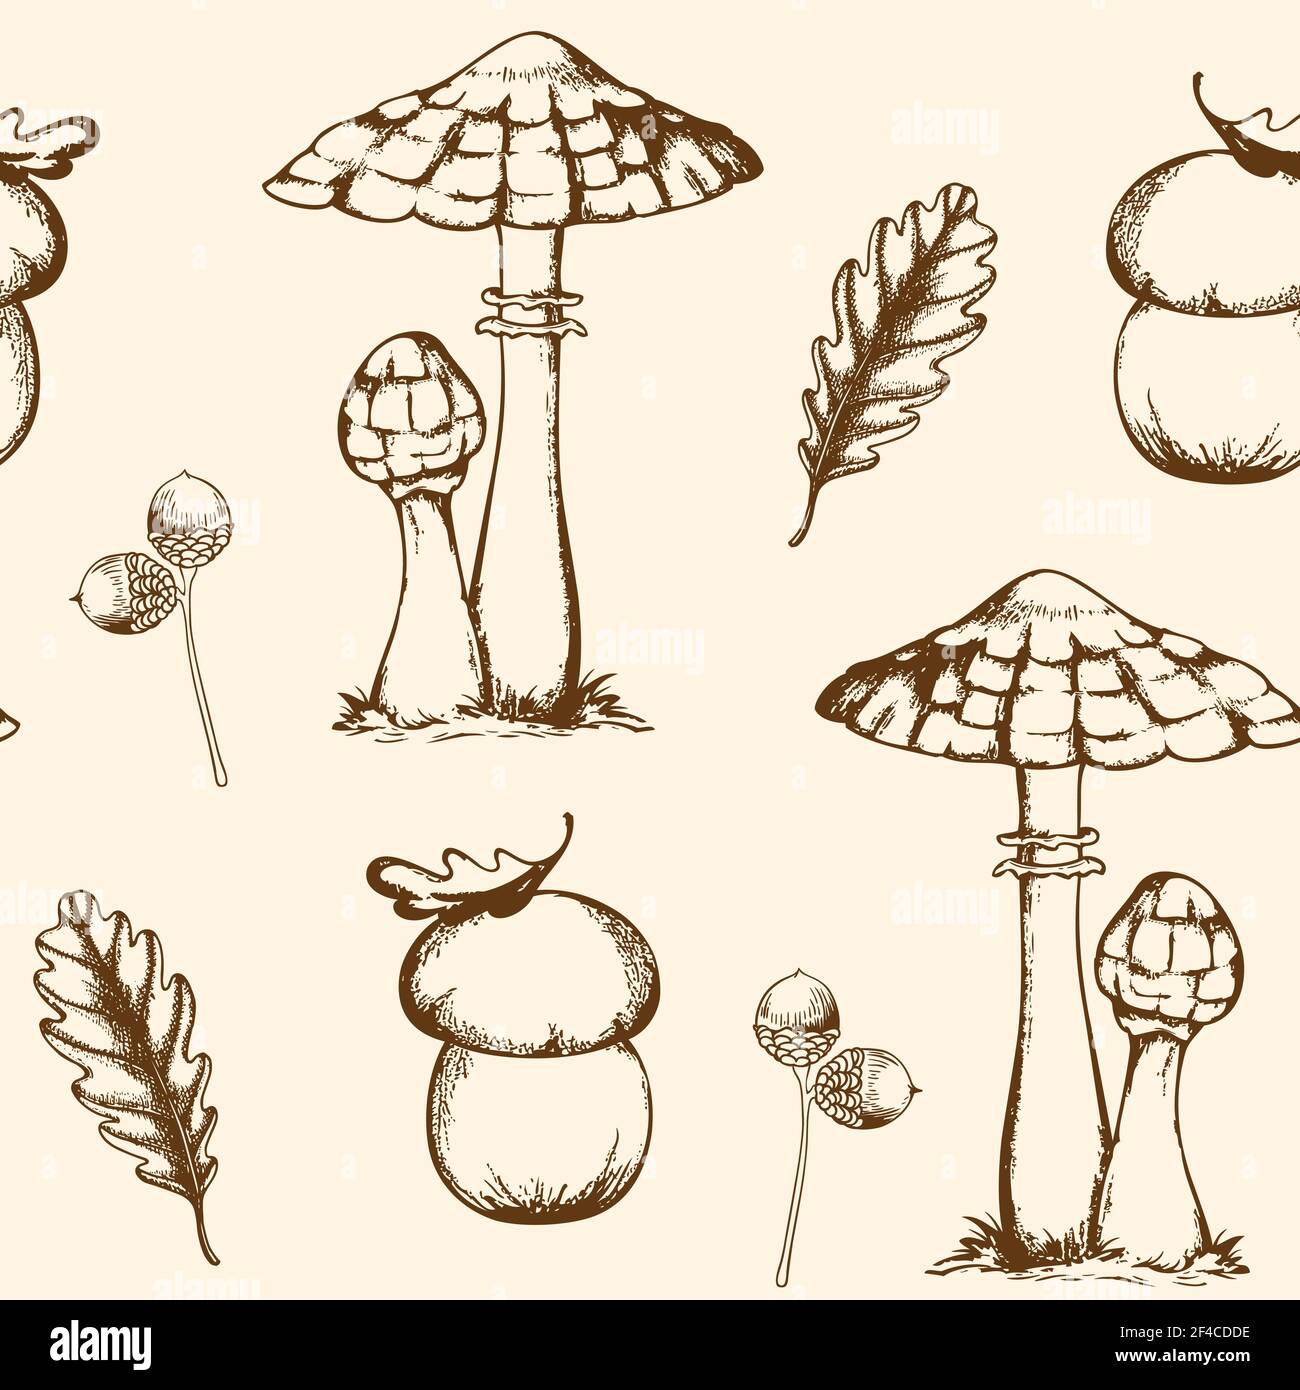 Vintage hand drawn vector seamless pattern with mushrooms, acorns and falling oak leaves Stock Vector